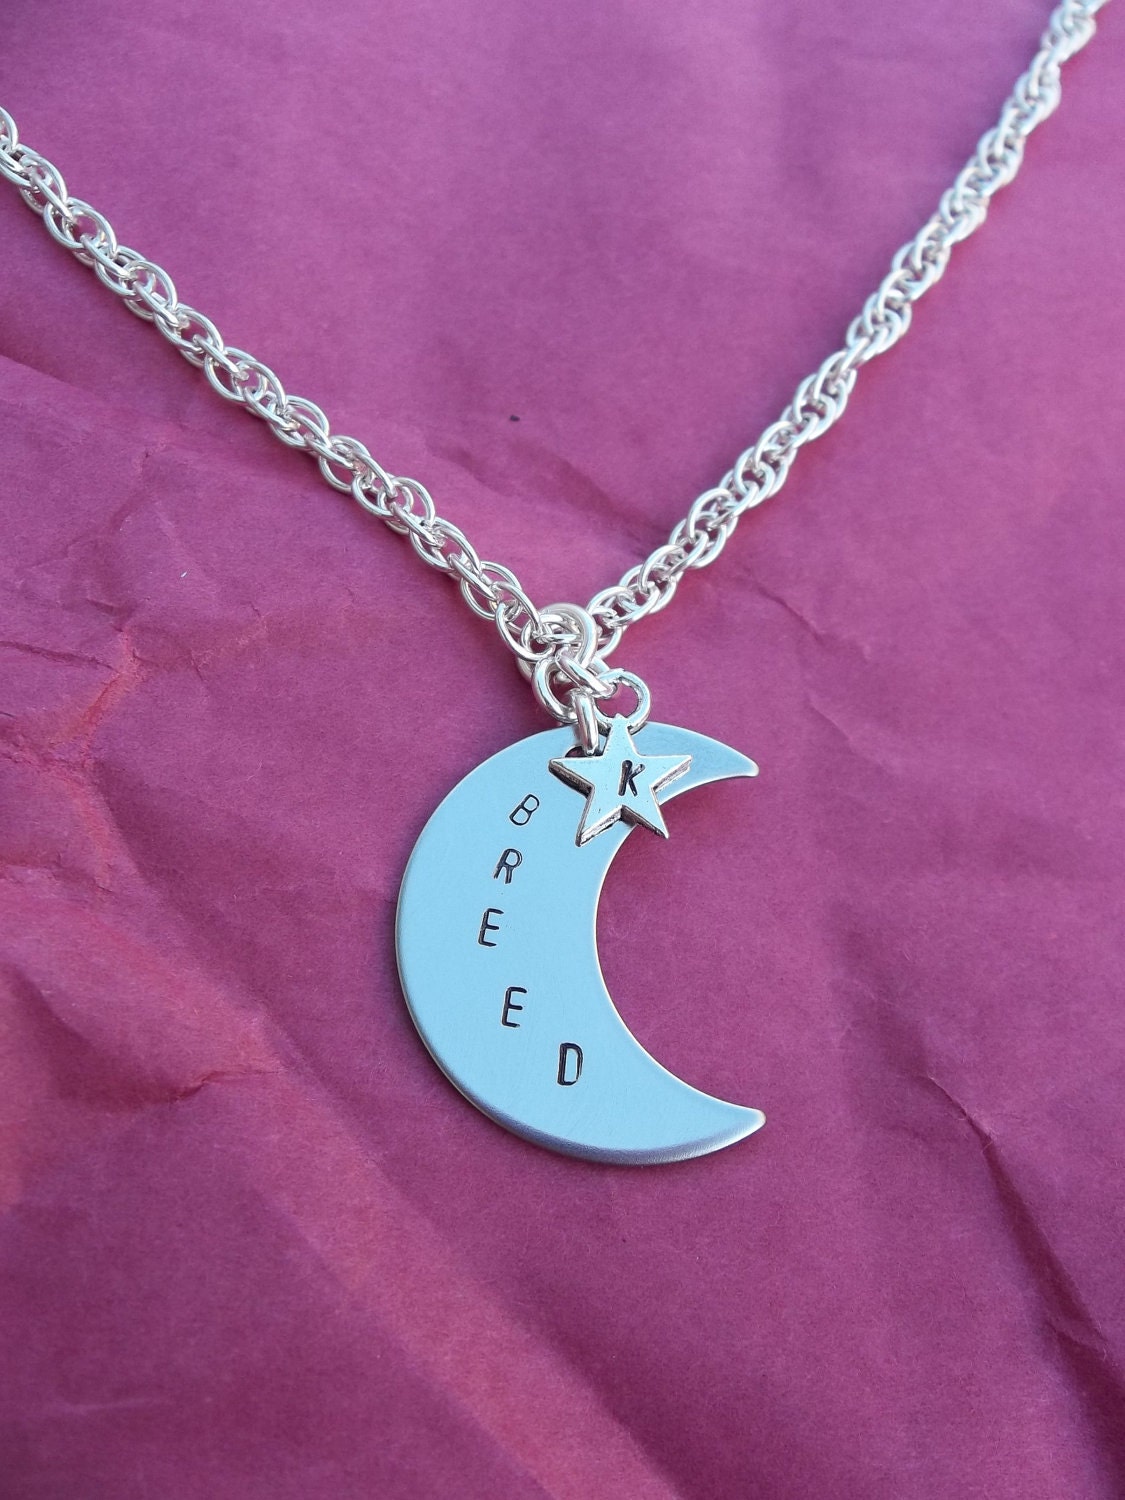 Midnight Breed Hand-Stamped Necklace Inspired by Lara Adrian's Paranormal Romance series